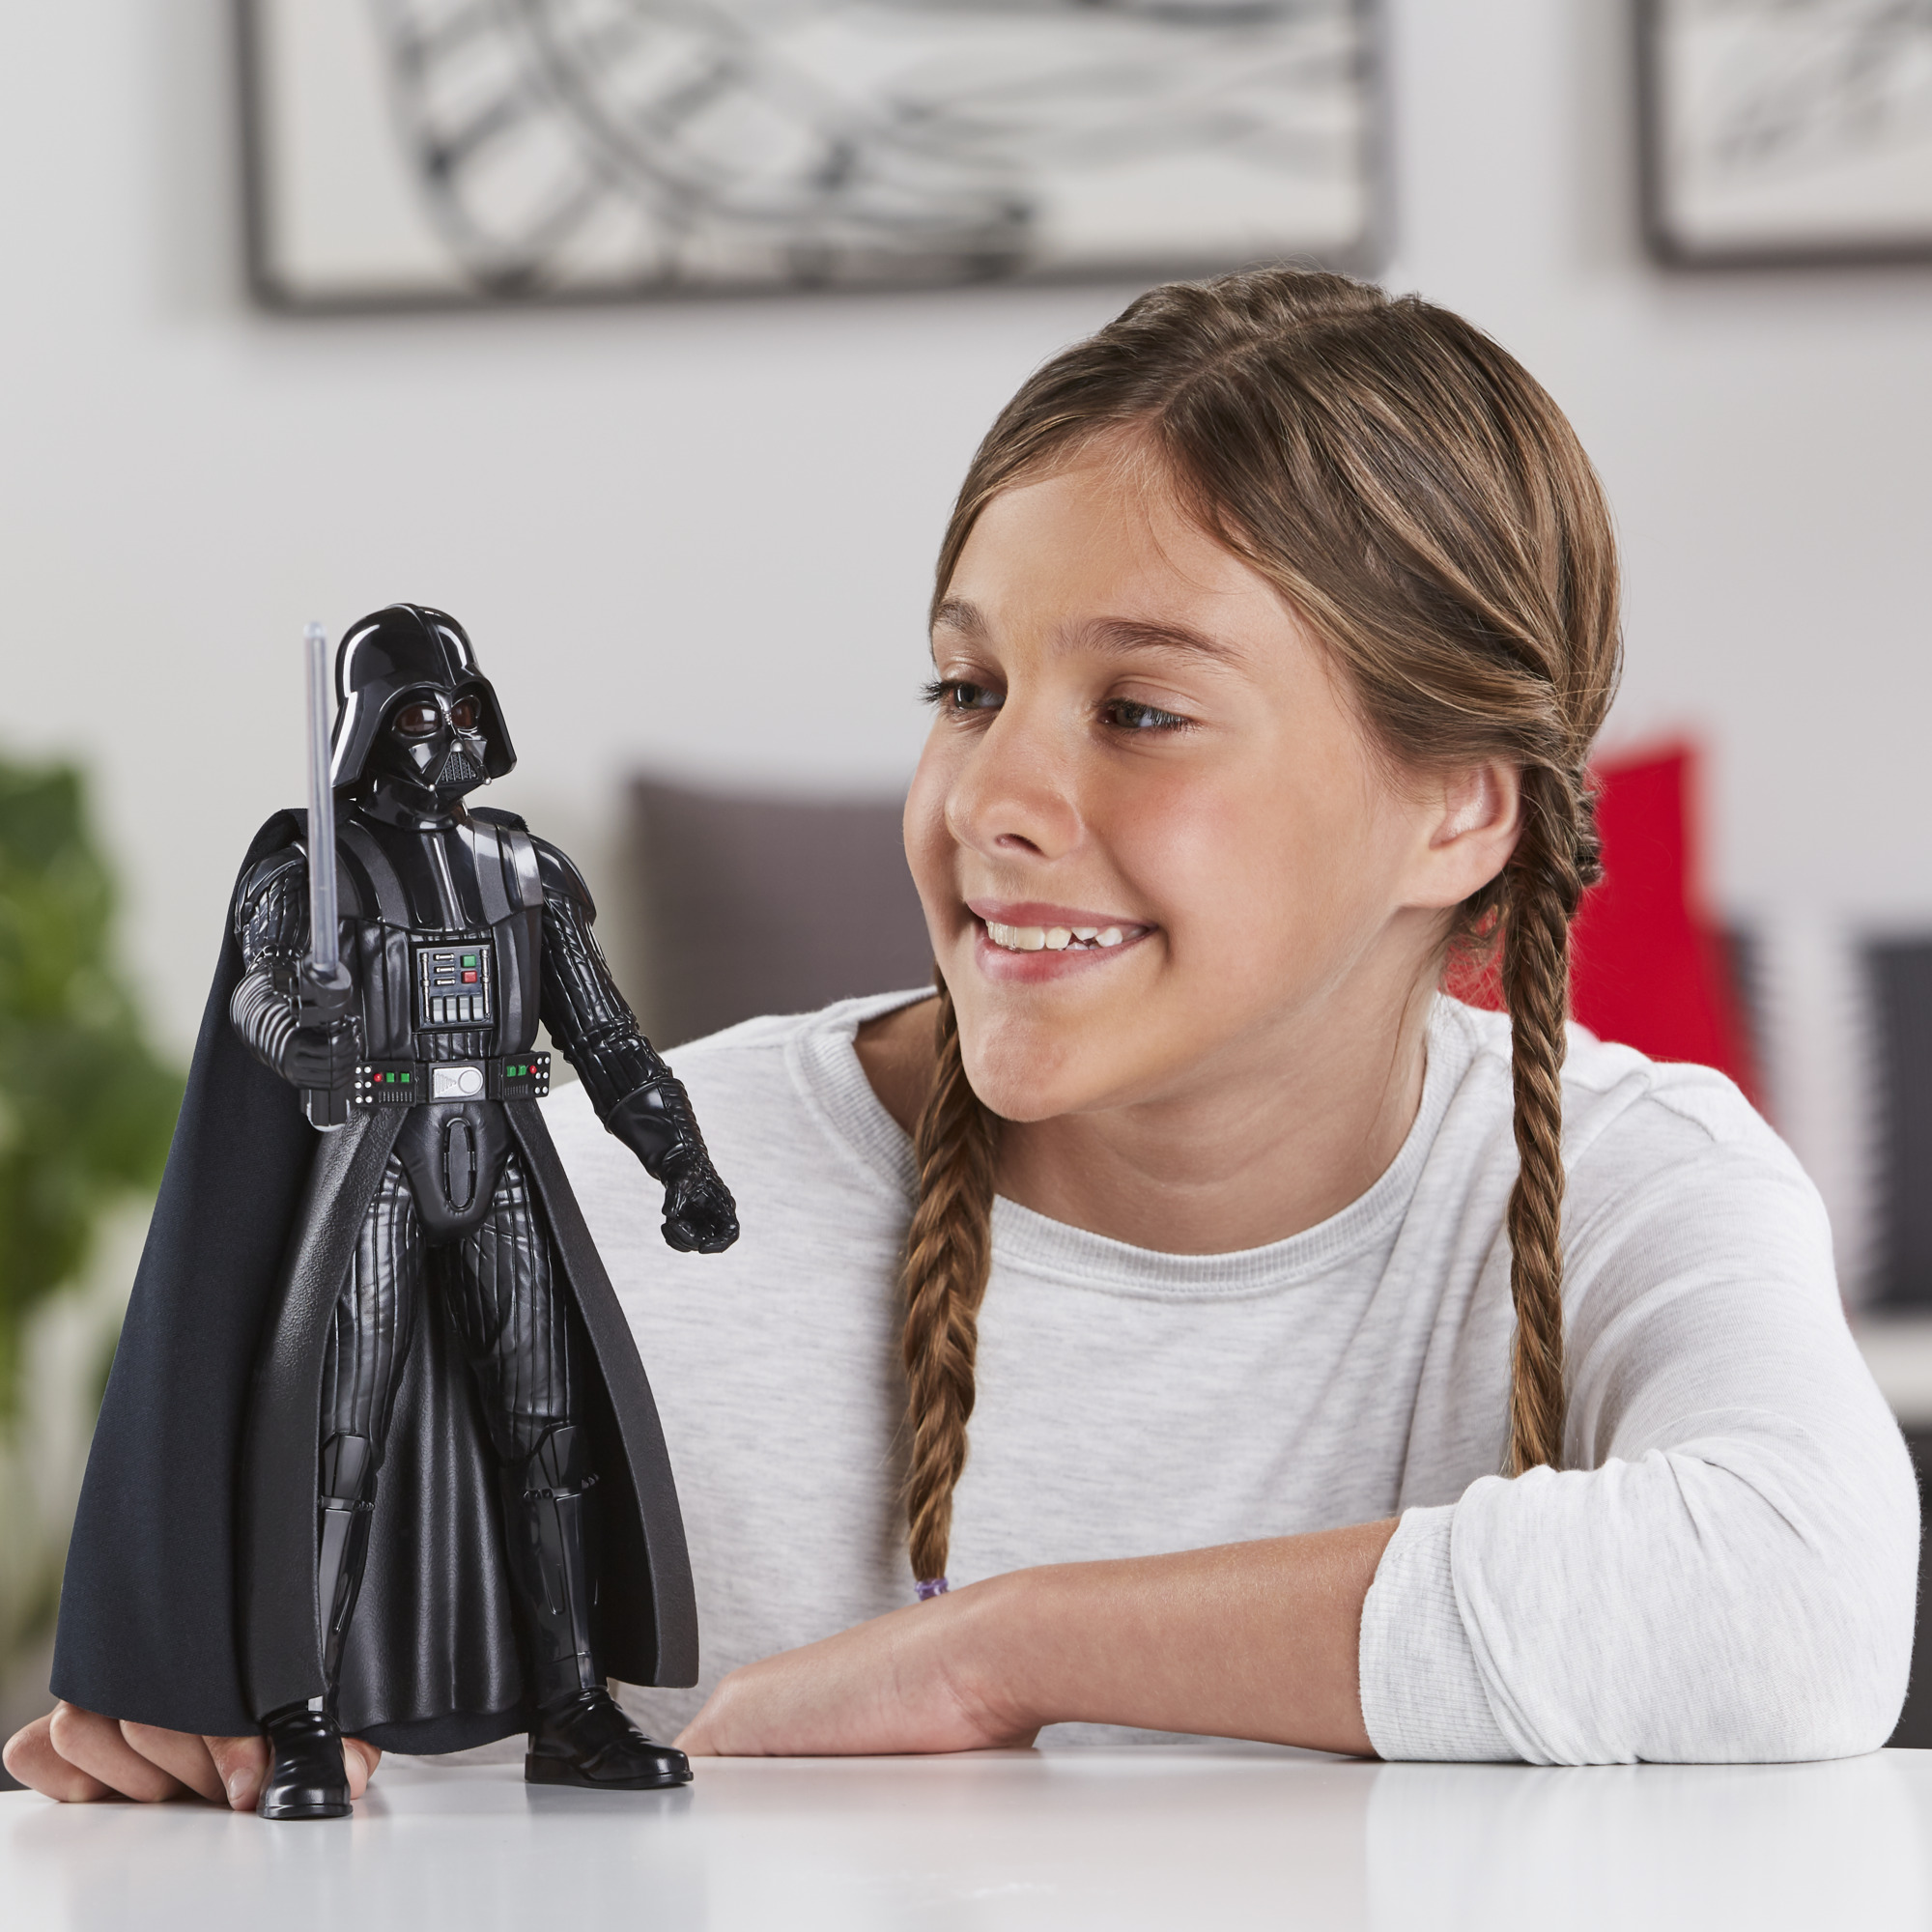 Star Wars: Obi-Wan Kenobi Darth Vader Toy Action Figure for Boys and Girls Ages 4 5 6 7 8 and Up (12”) - image 11 of 11